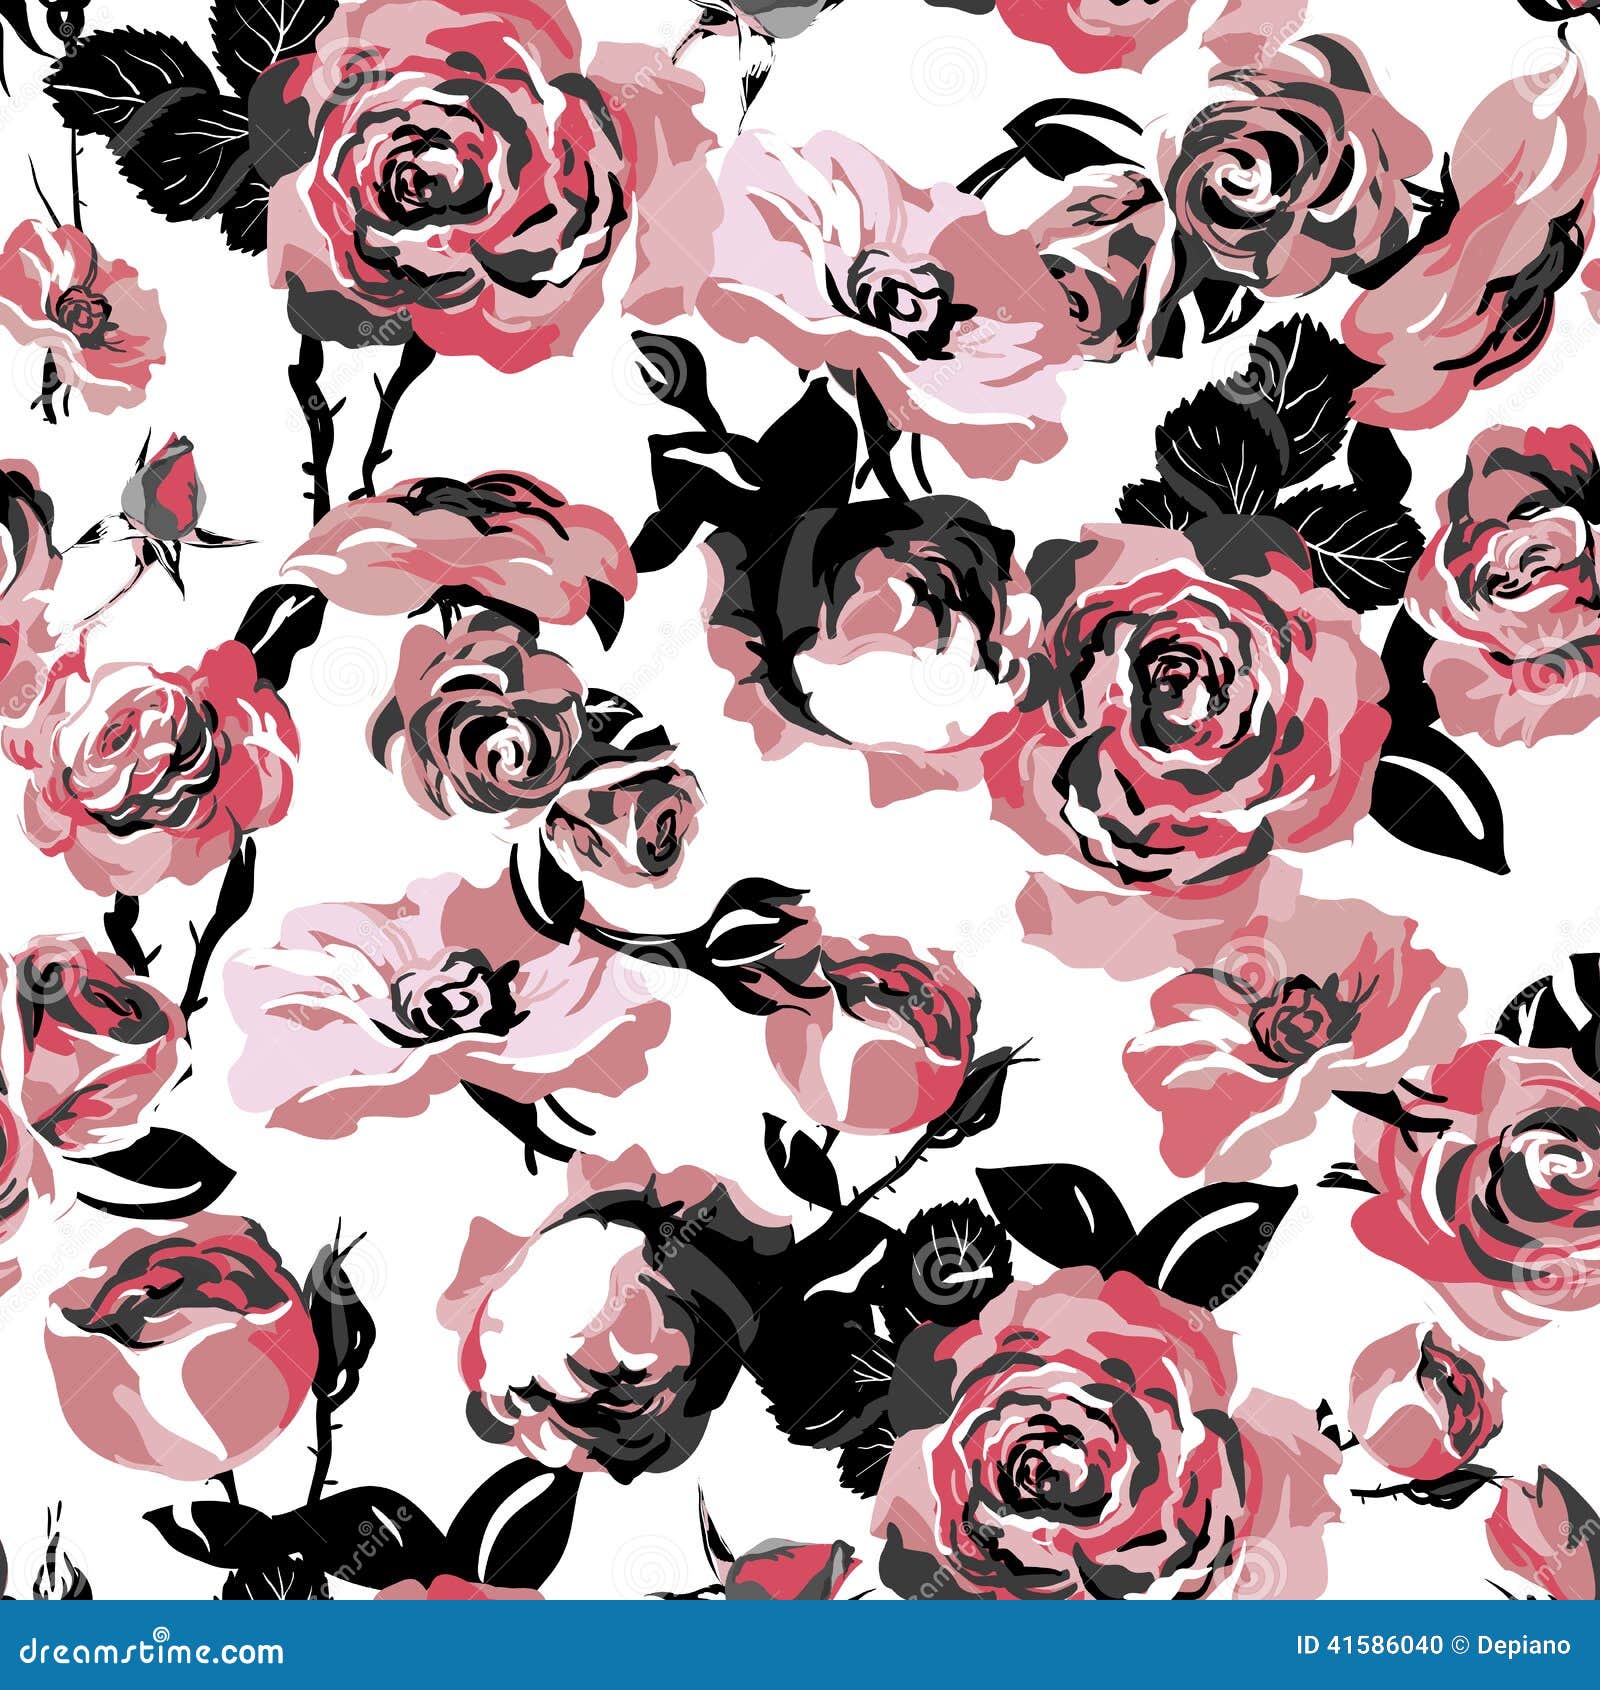 monochrome seamless pattern with vintage roses